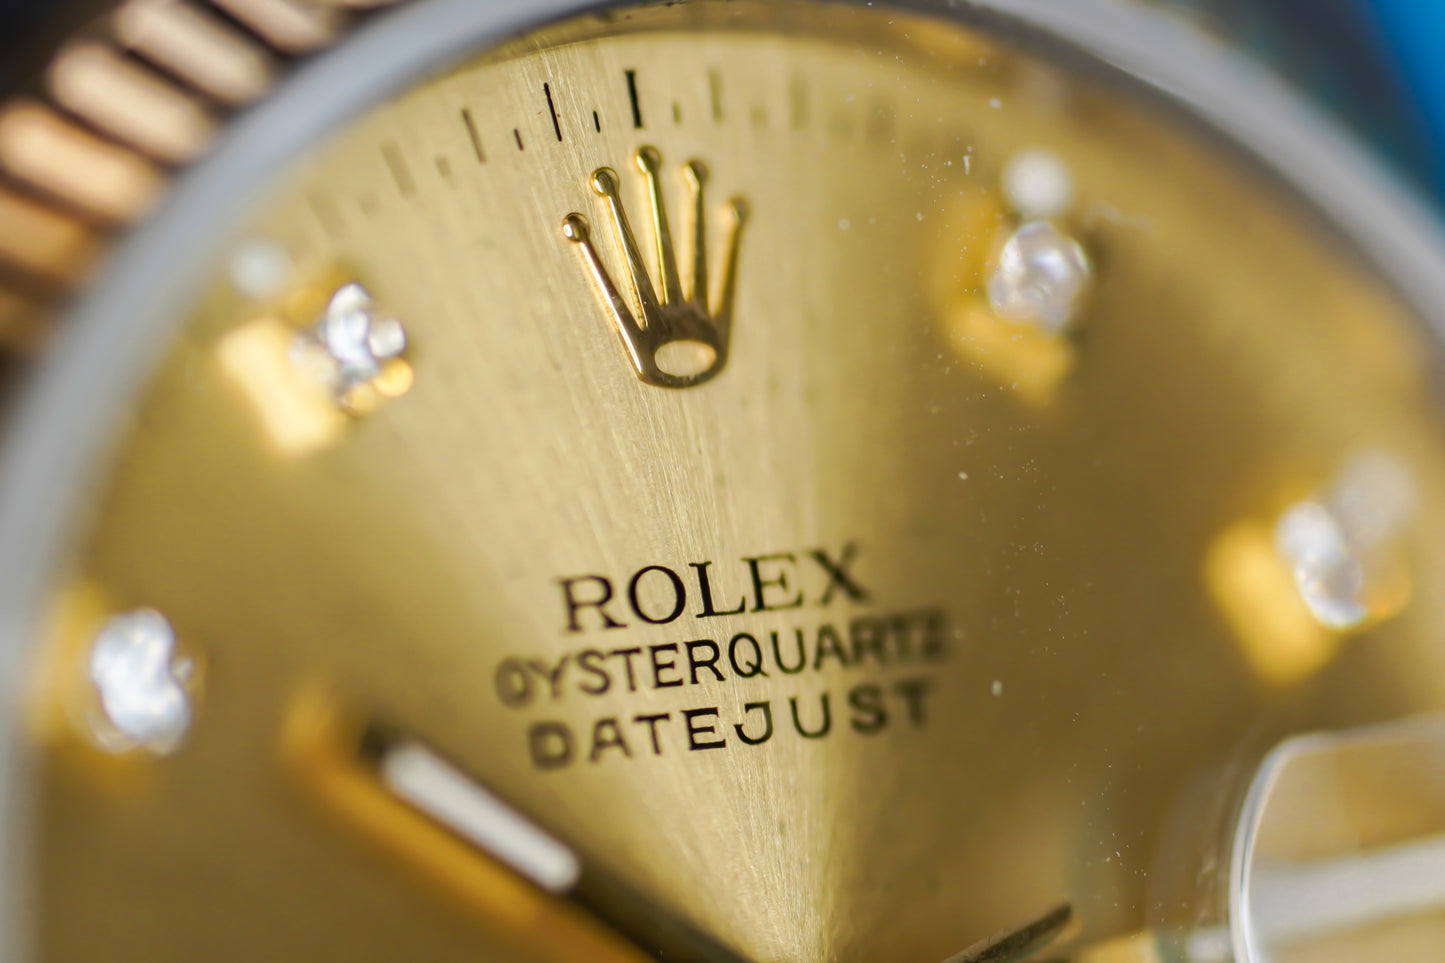 Rolex OysterQuartz 36mm with Diamond Dial and – Creamy Patina